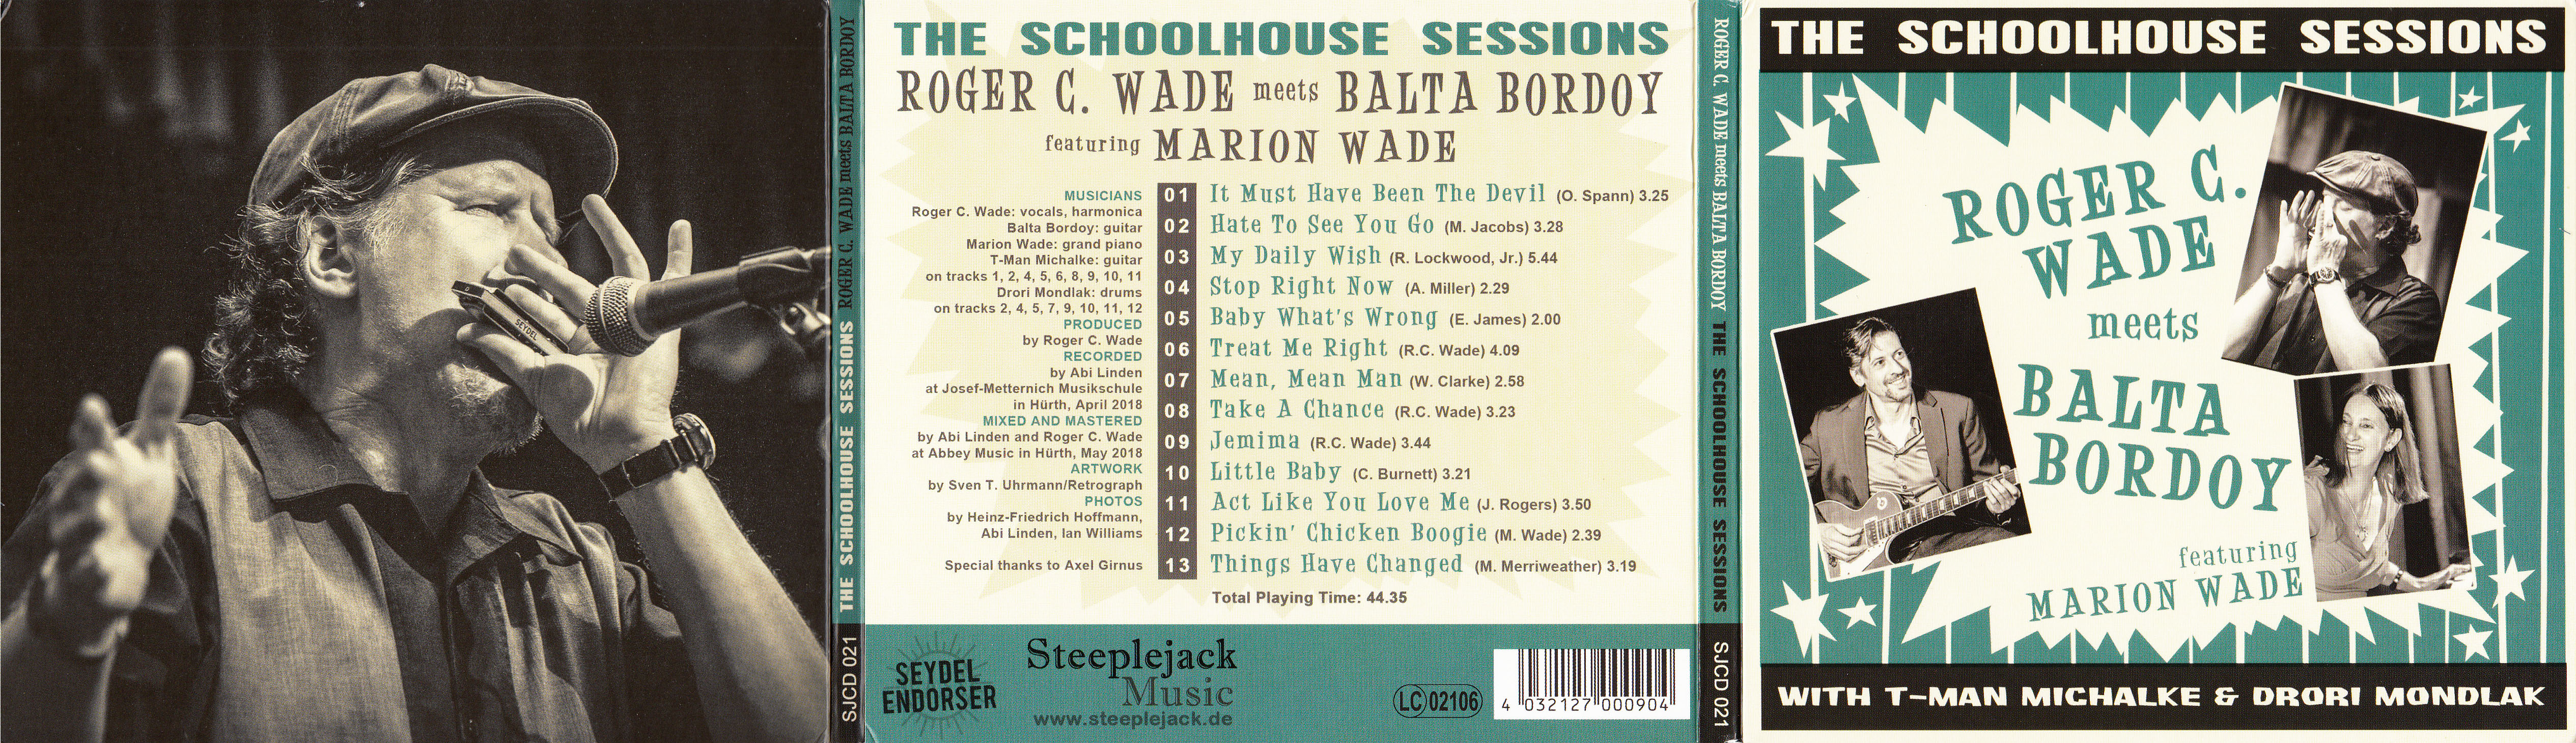 Roger C. Wade Meets Balta Bordoy - The Schoolhouse Sessions - Front